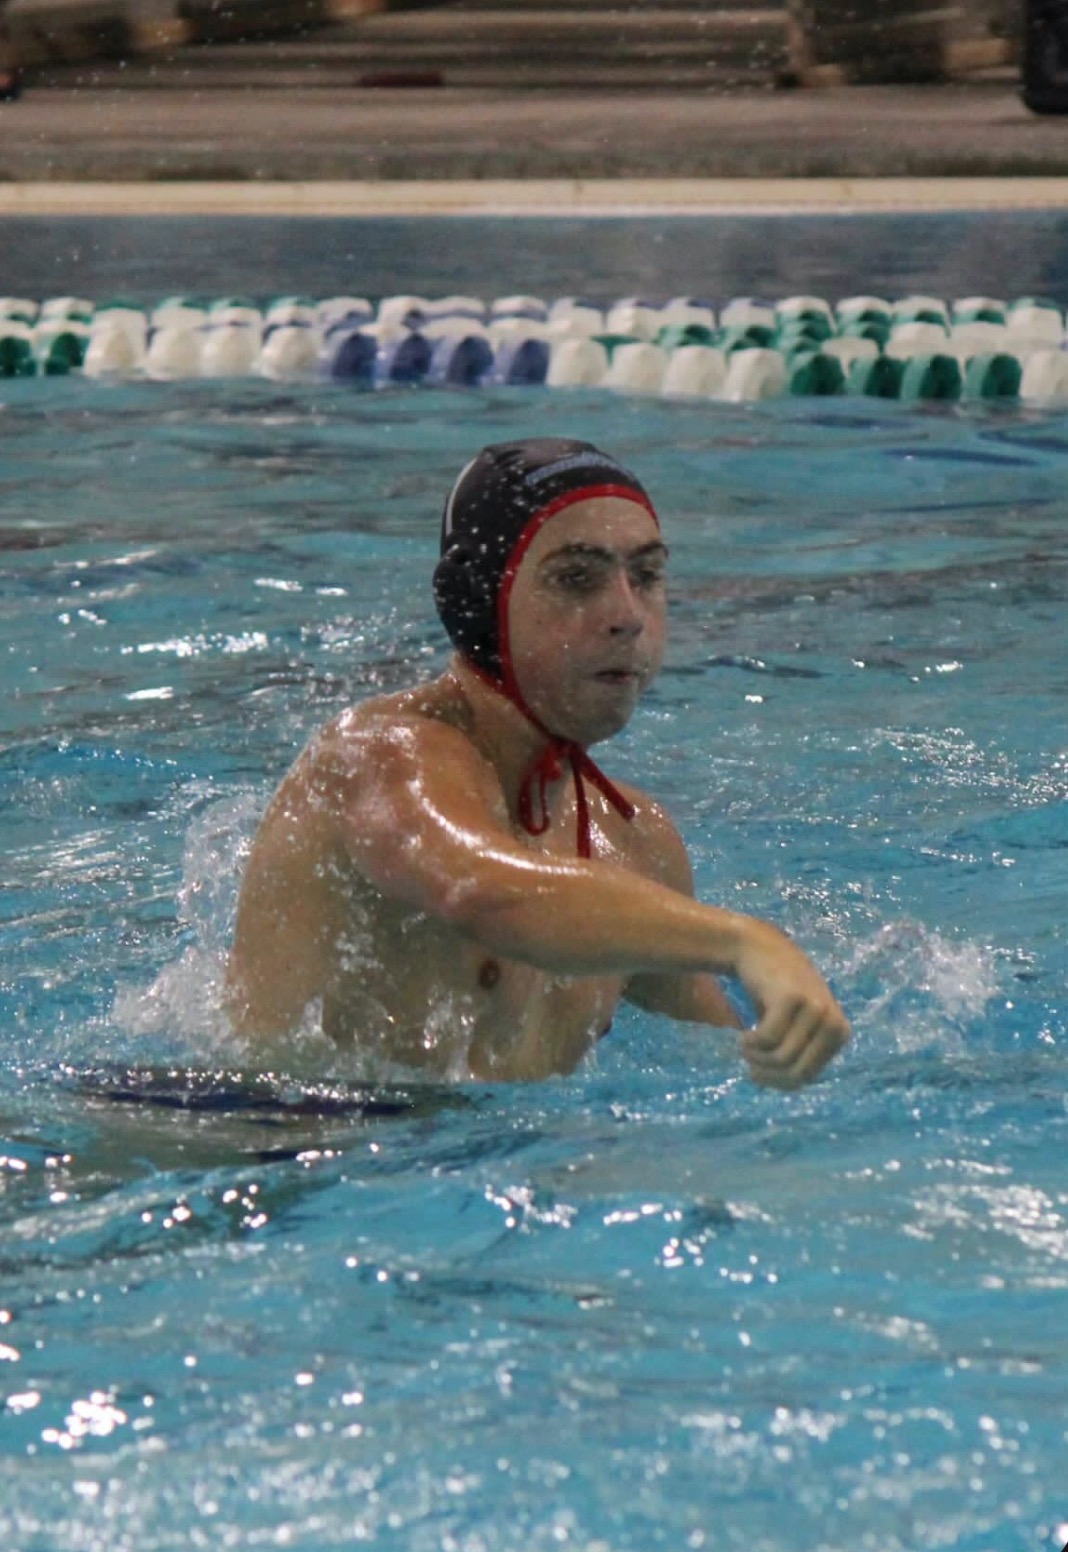 Senior Sawyer Maddox takes a shot during a water polo match. Maddox has been playing water polo since he was 10 years old, and in his high school career led the state in forced turnovers and got selected to represent the Southeast at Nationals. (Courtesy of Sawyer Maddox)